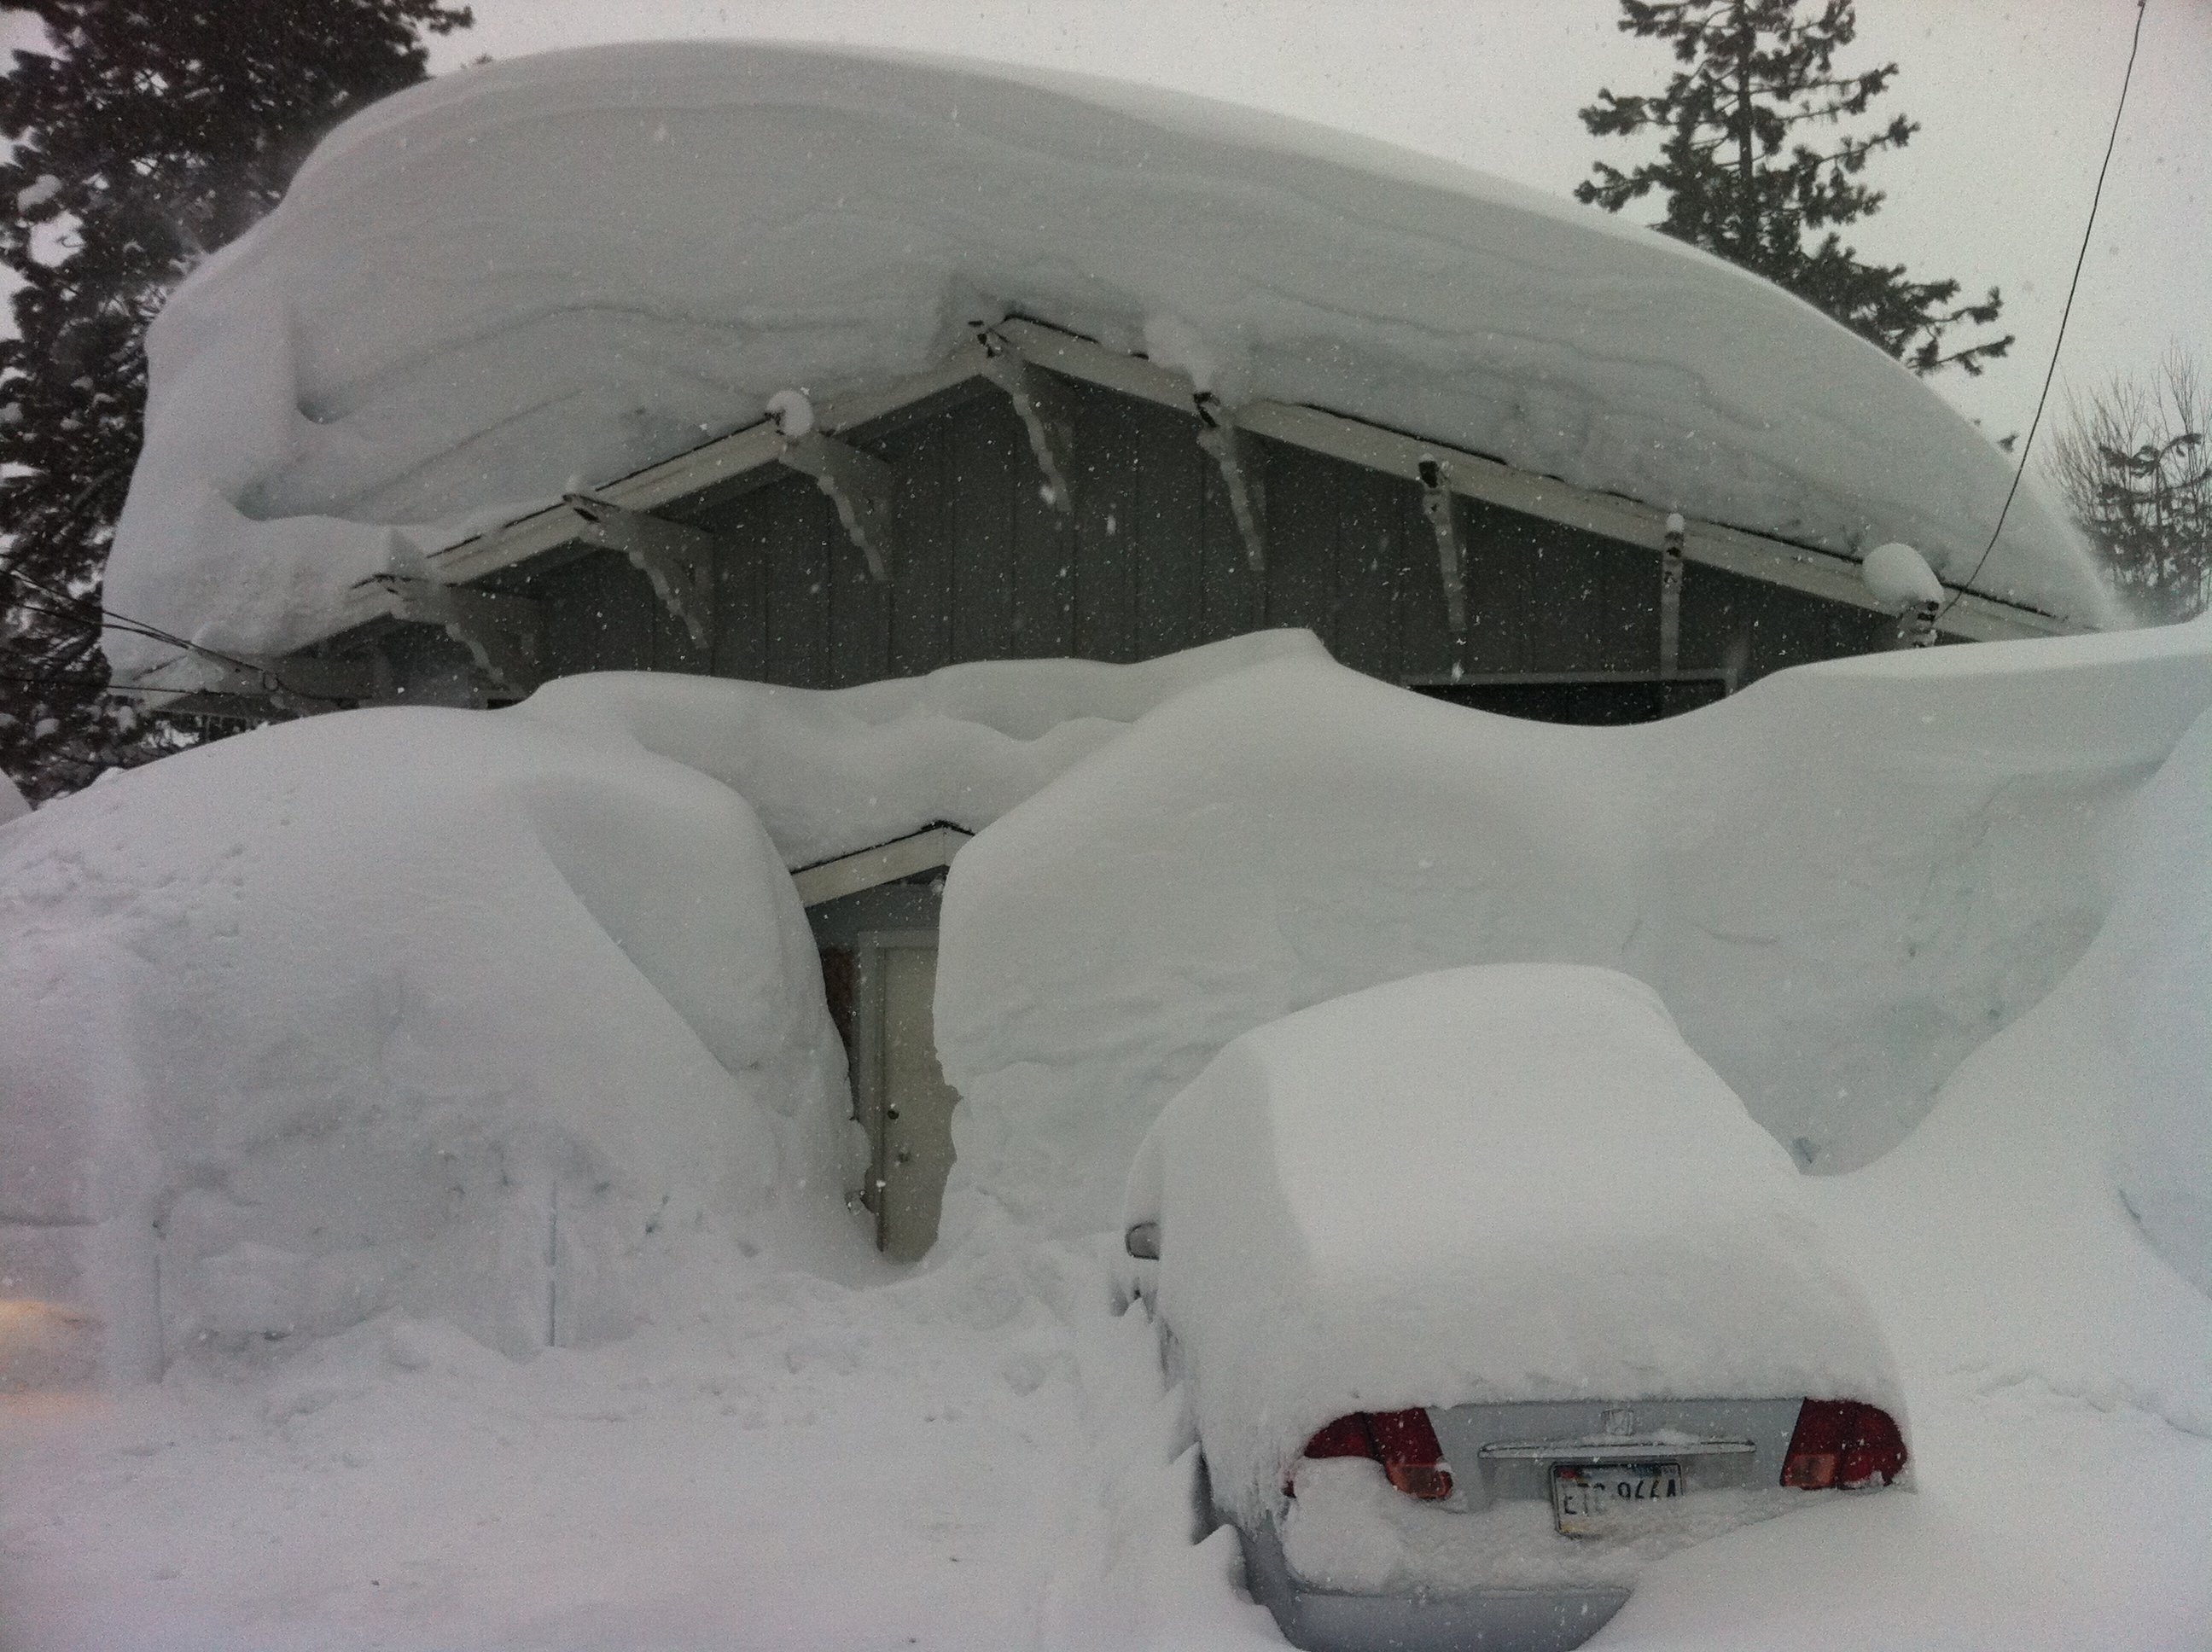 852" of snow fell in the Squaw Valley, CA in 2010/11. photo: miles clark/snowbrains